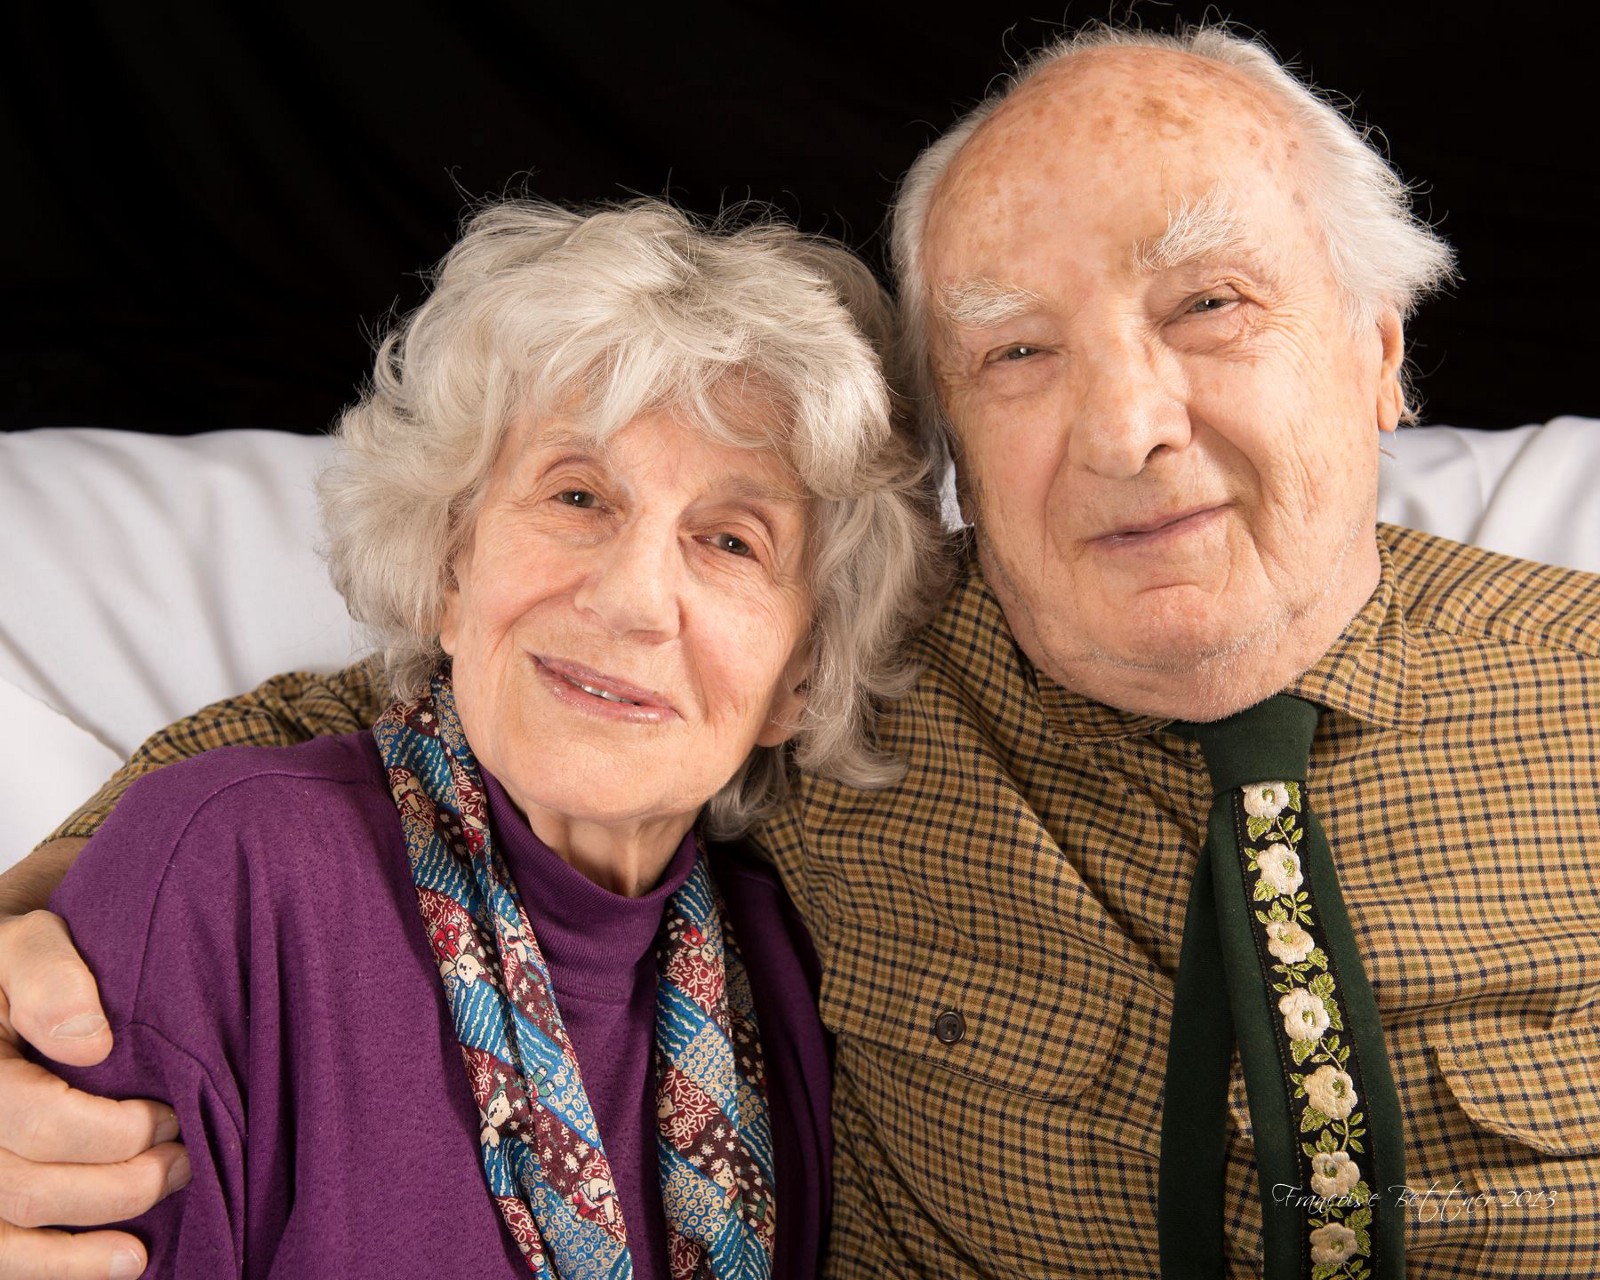 5 Warning Signs that Your Elderly Parents May Need Your Help